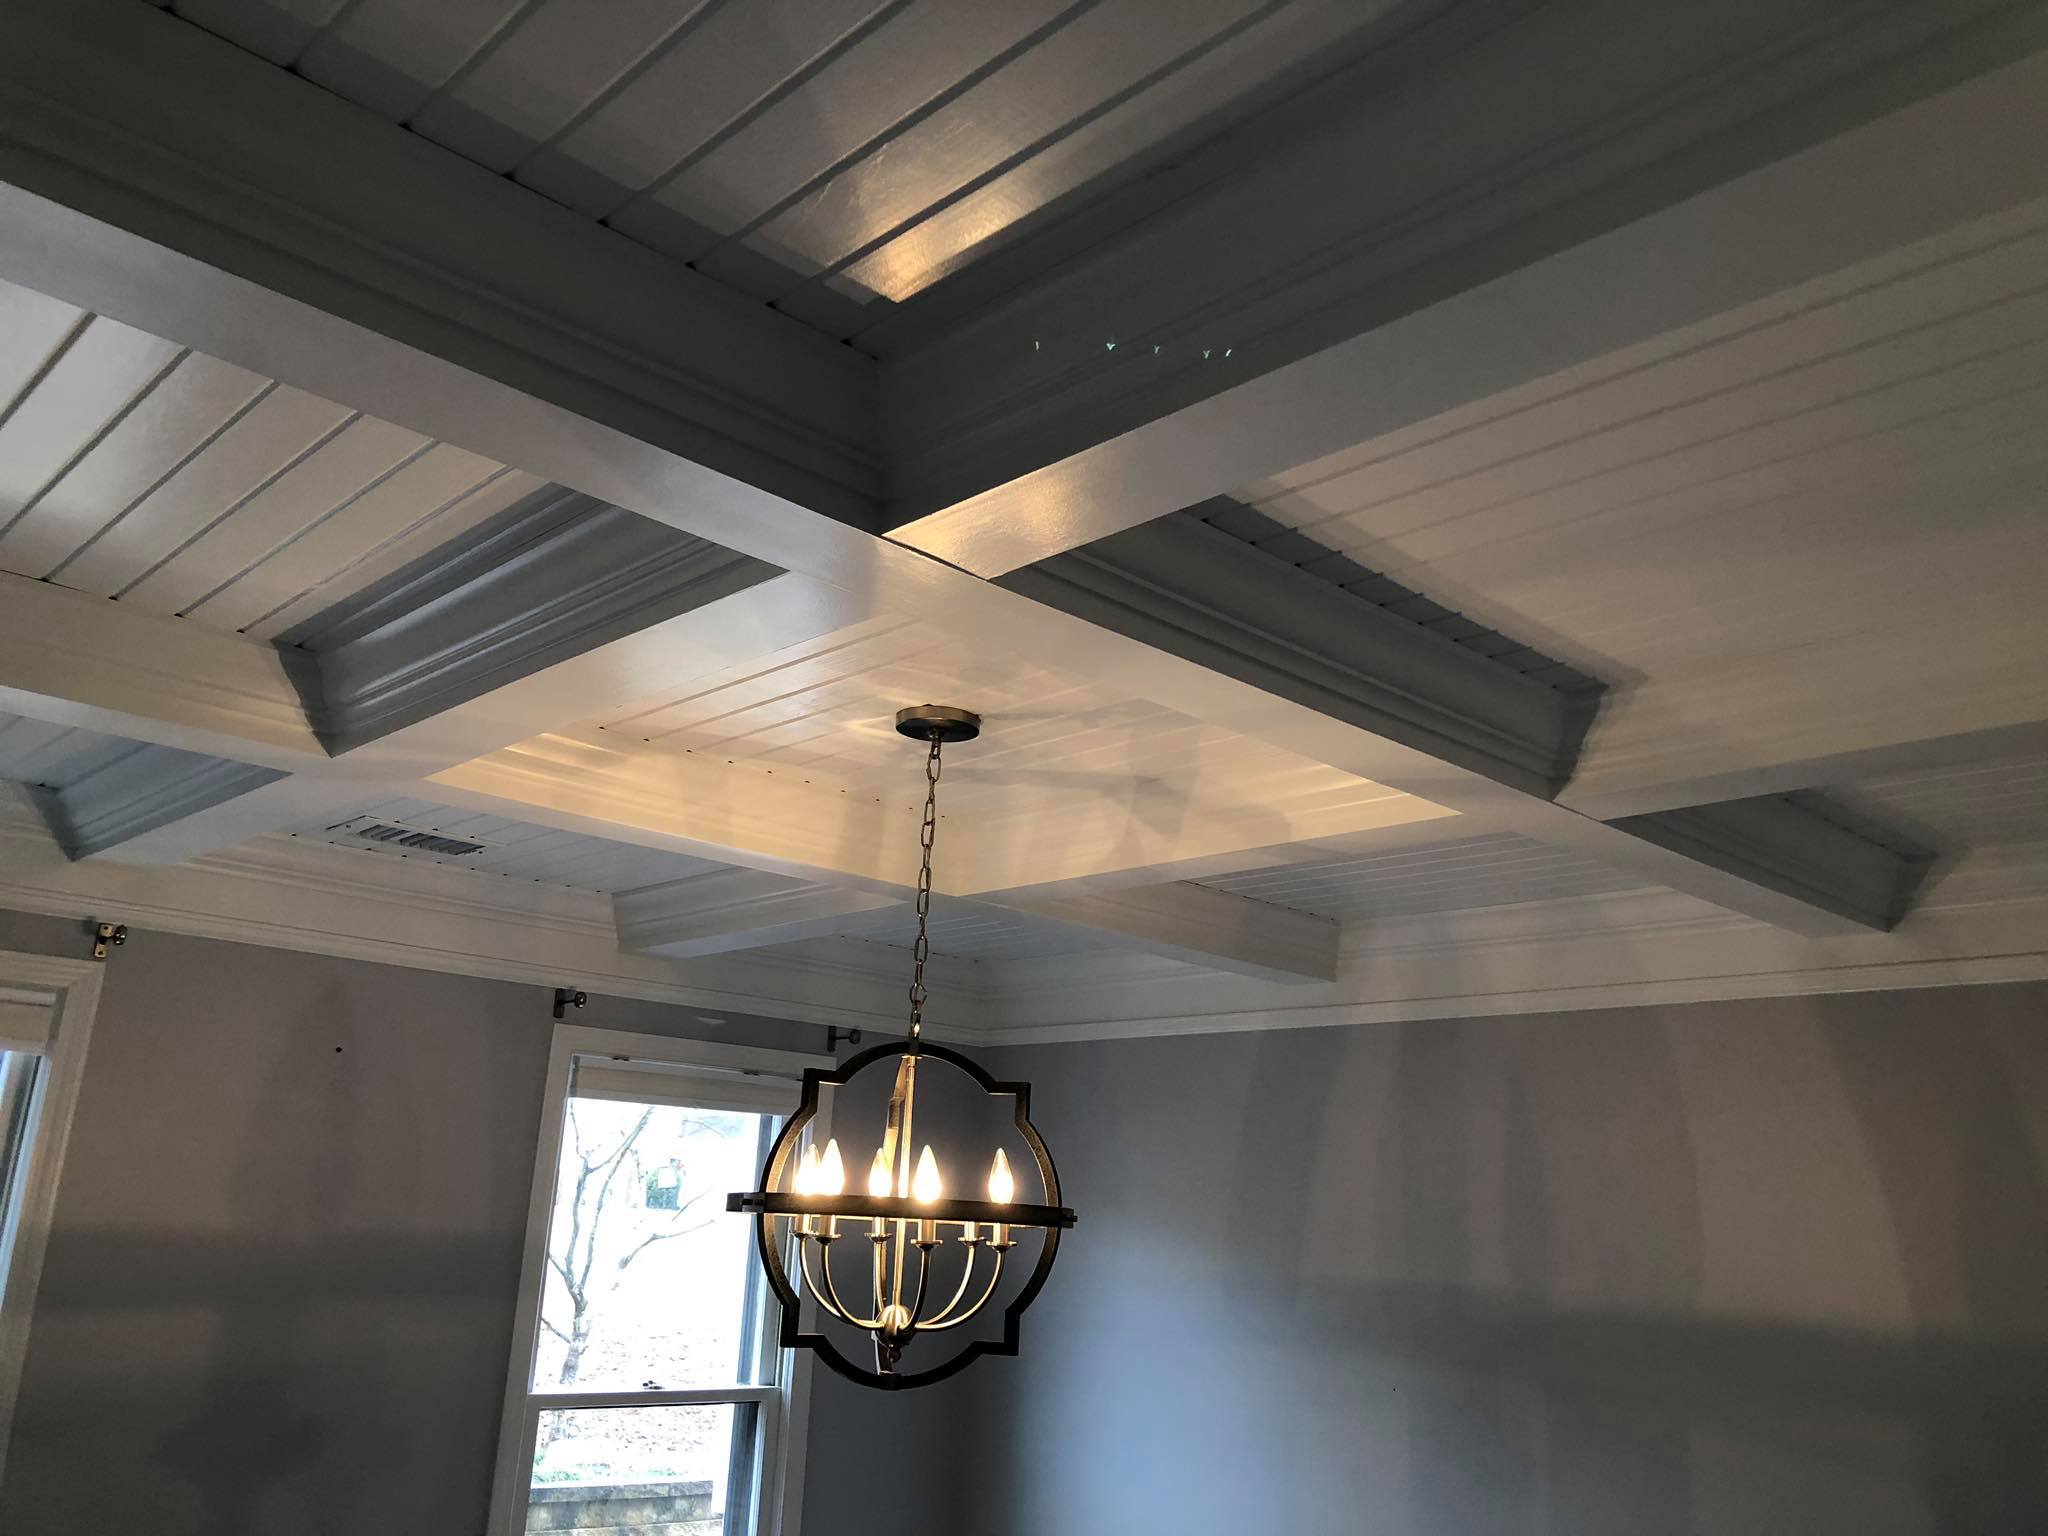 Custom Ceiling with Beams and Shiplap Paneling Painted White